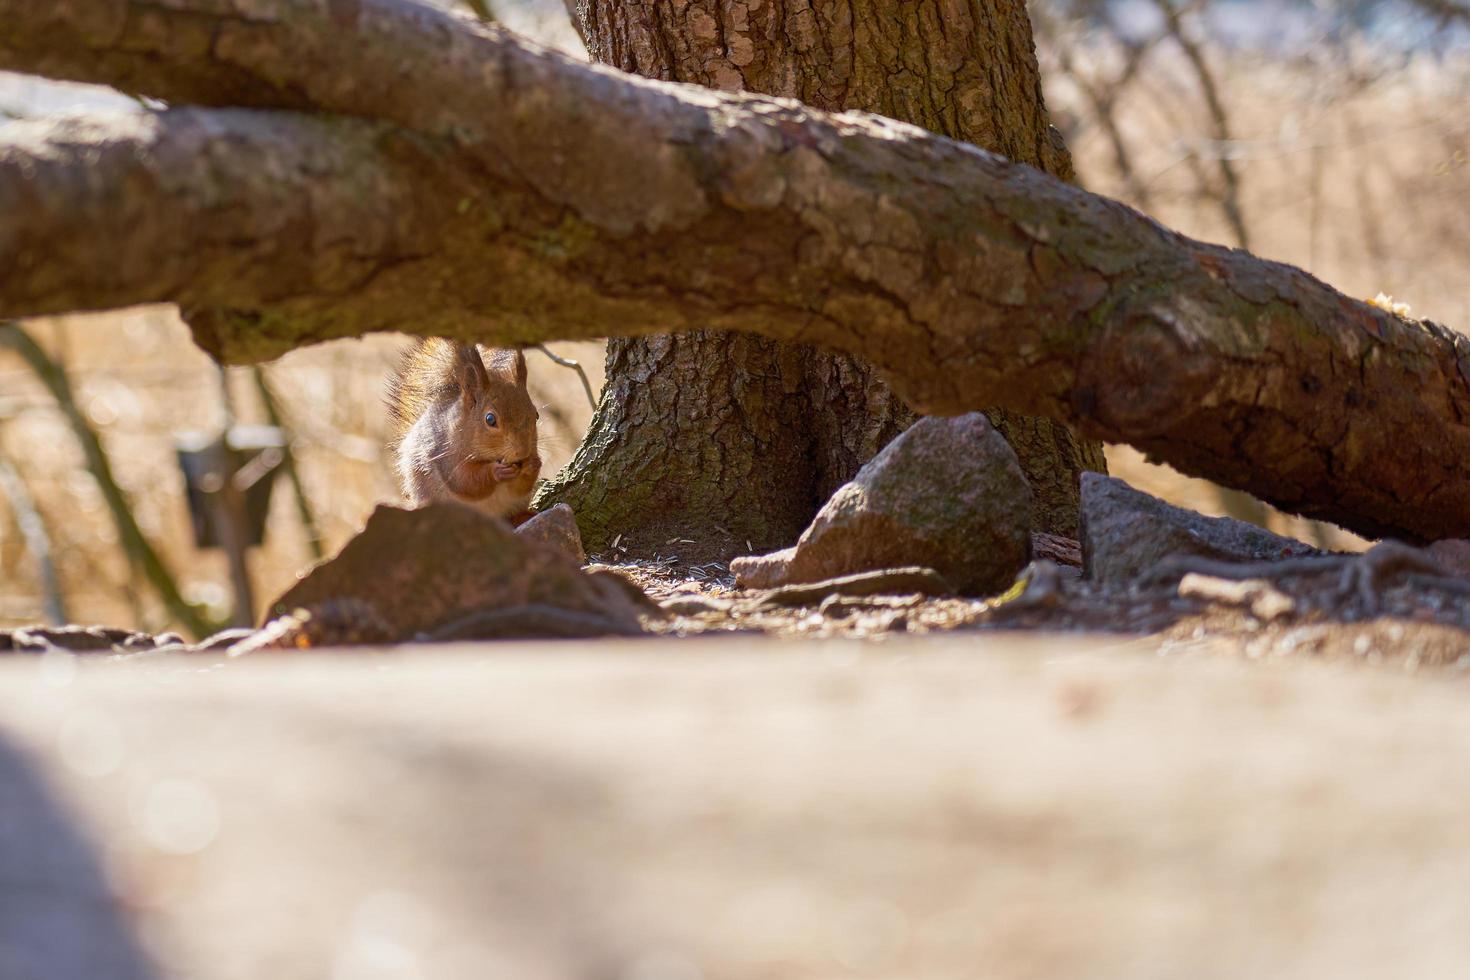 Squirrel eating a nut under a tree branch photo